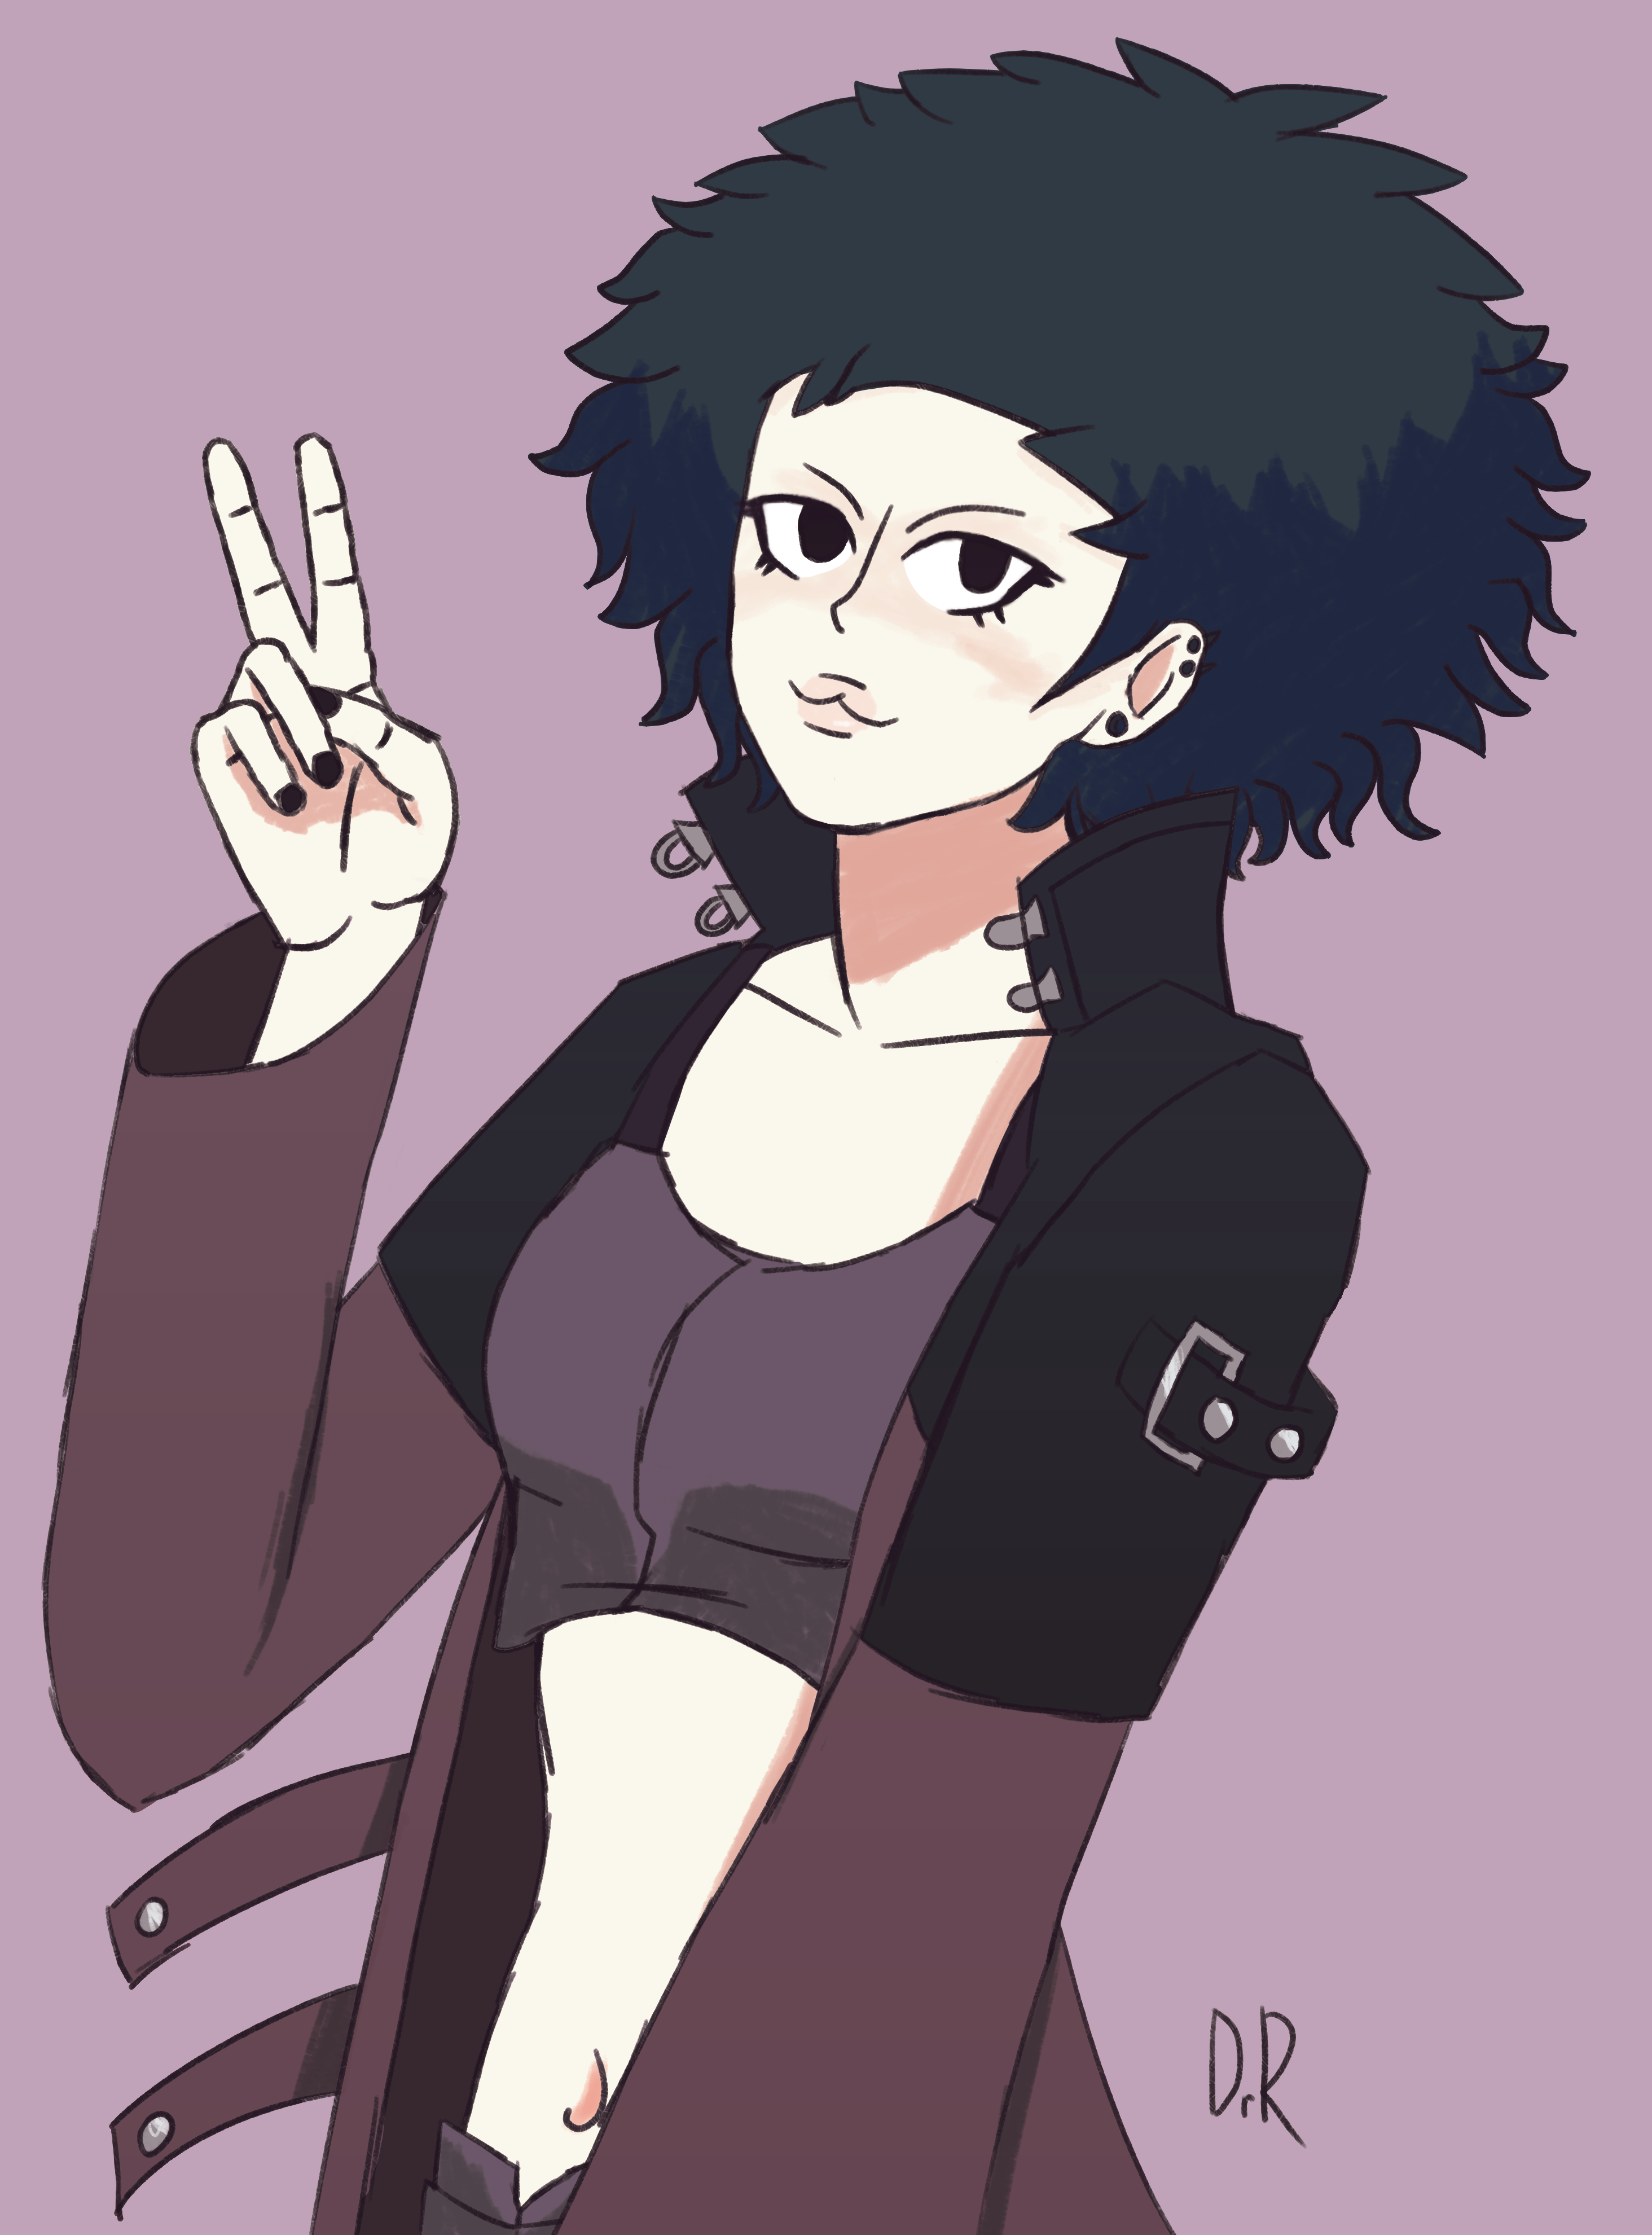 Lash from Advance wars, holding up a peace sign